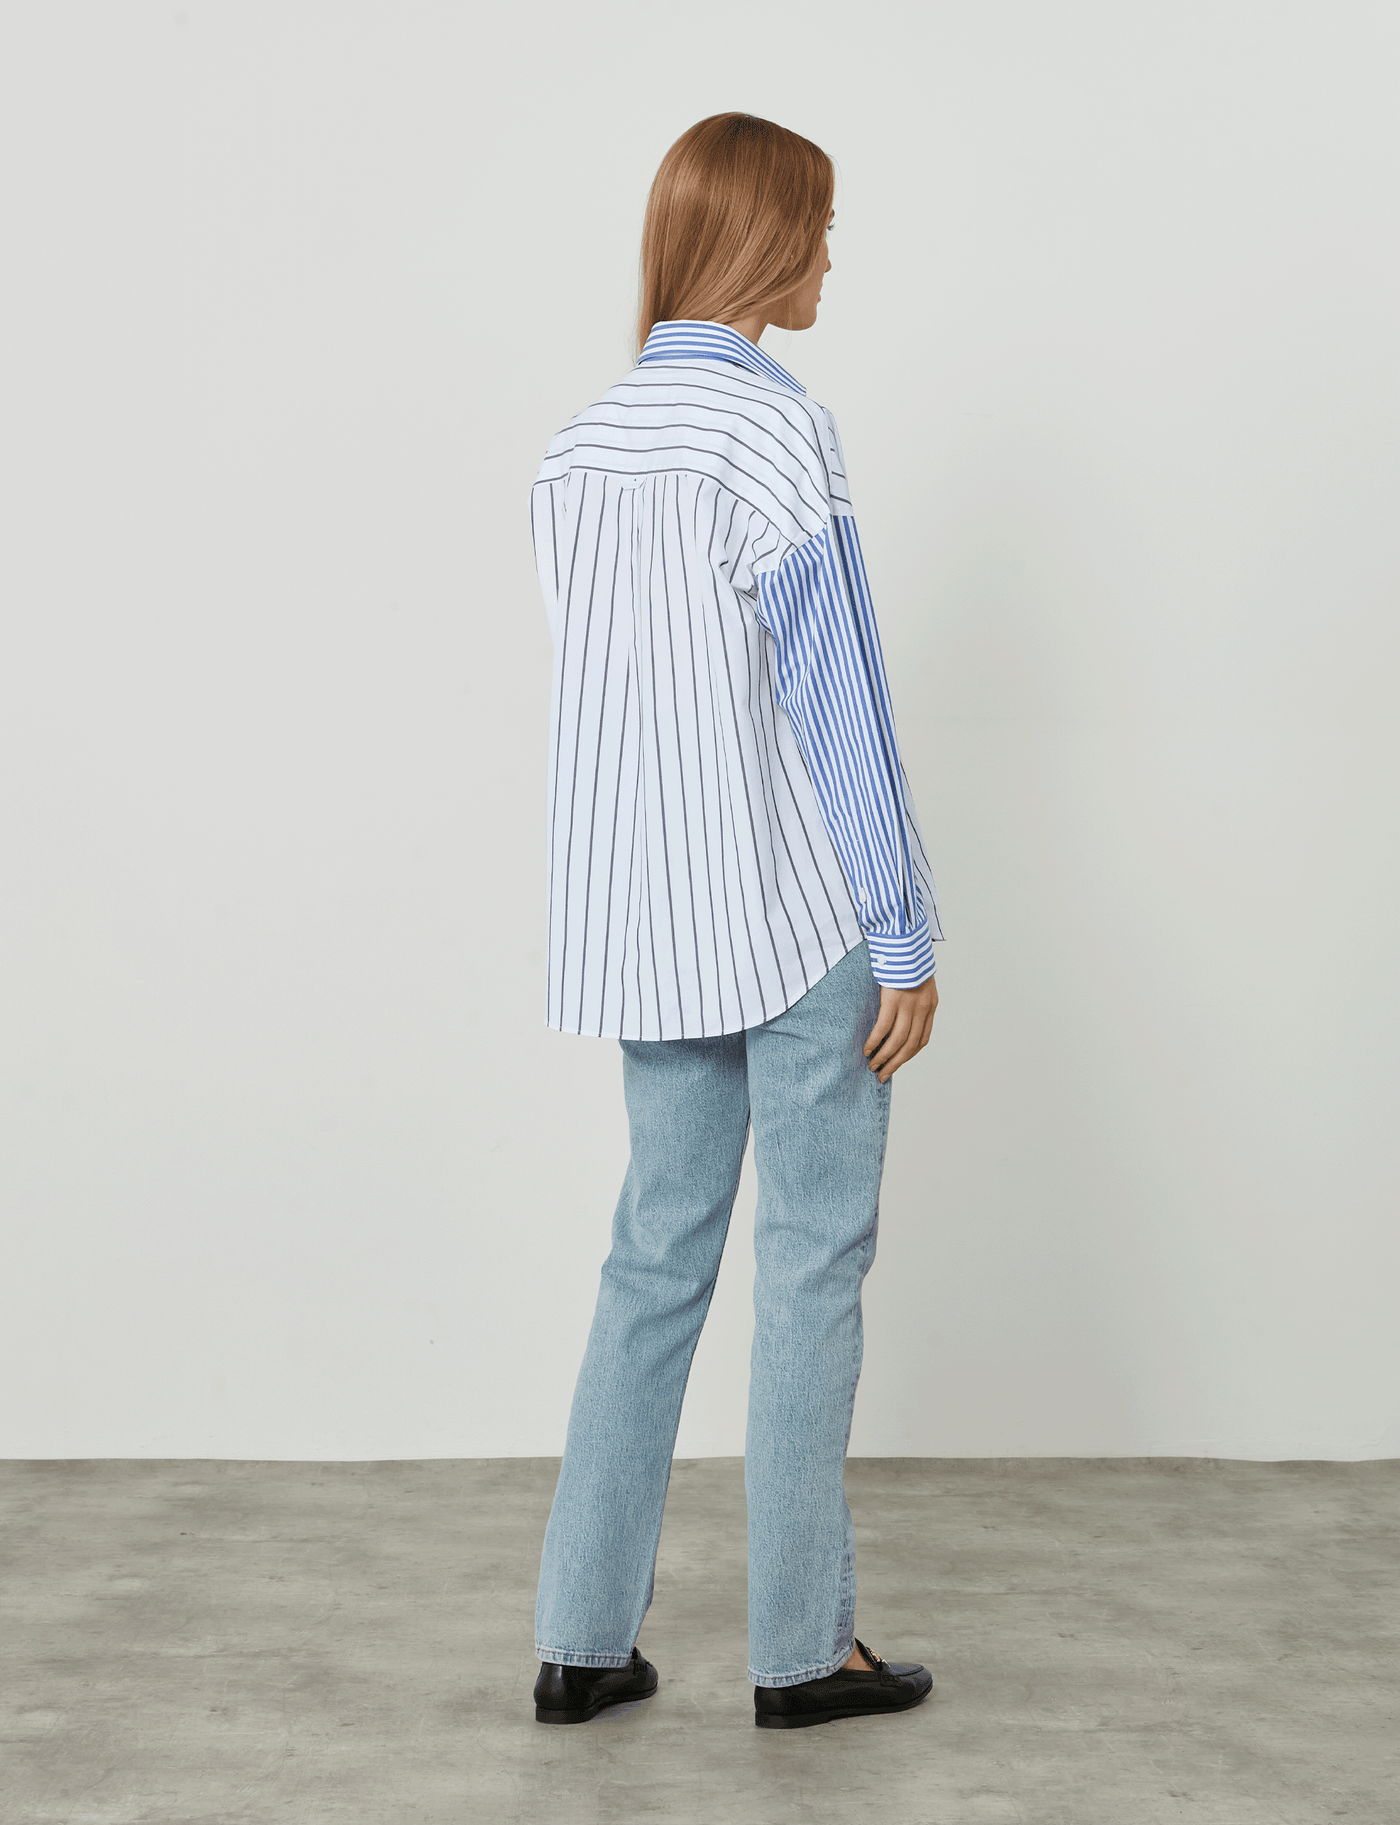 The Weekend: Fine Poplin, Midnight and Royal Blue Stripe Patchwork